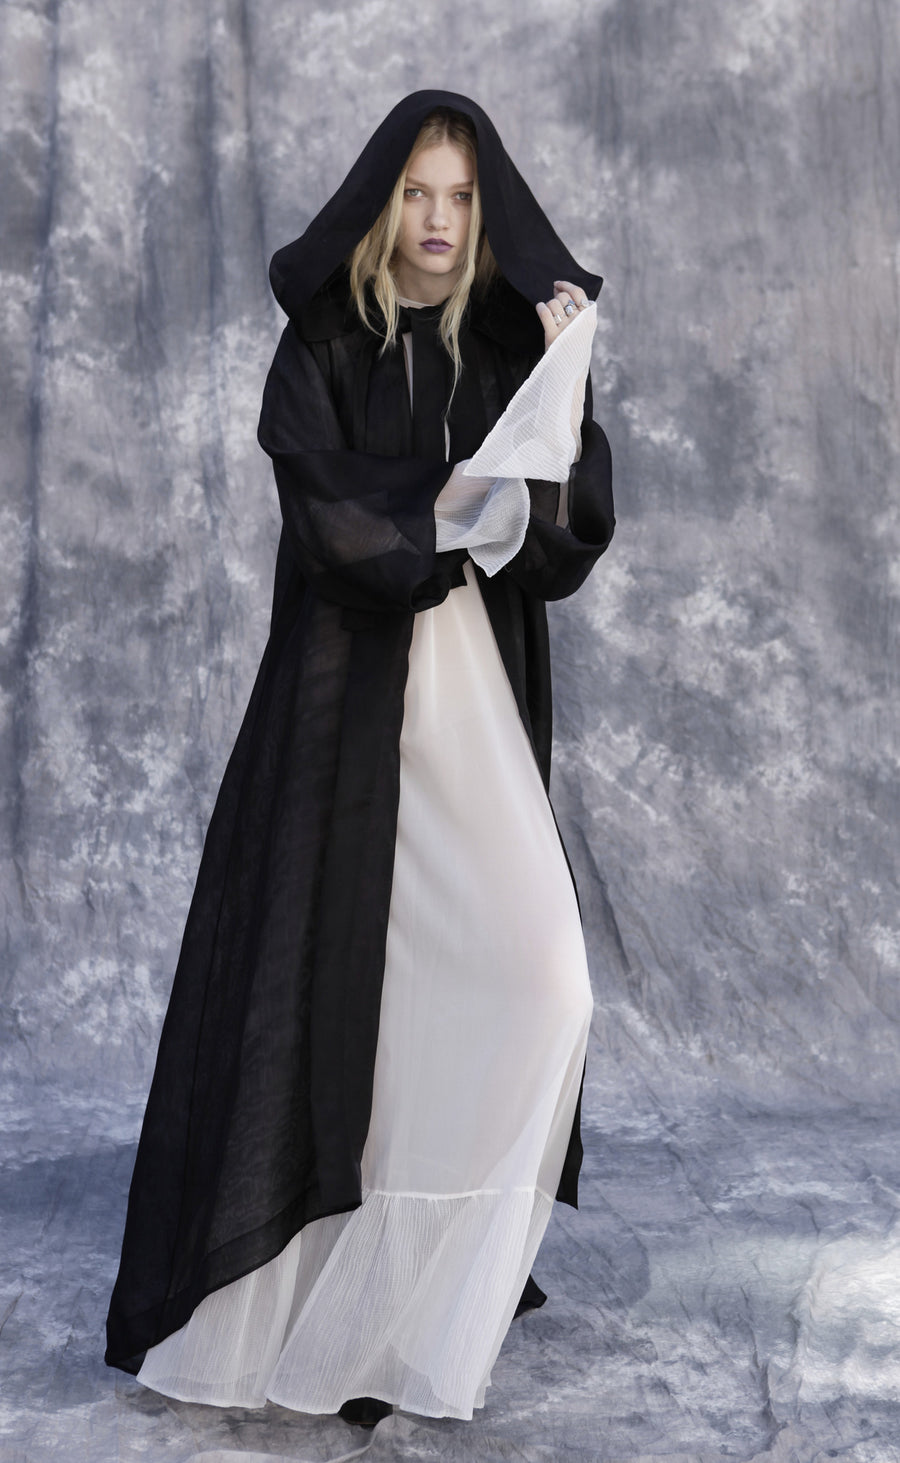 Maggie Laine IMG model Wendy Nichol New York Clothing Designer Handmade in NYC New York City SS17 Fashion Runway Show Signals to the Mothership Made to Order Custom Tailoring Made to Measure Death Valley Black Sheer Hood Hooded Cape Cloak Coat Belle Sleeves Long Train Oversized Hood White Sheer Apron Cross Tie Pleated Sleeves Dress Victorian Edwardian Gothic Goth Pagan Witch High Priestess Sorceress Magician Wizard 